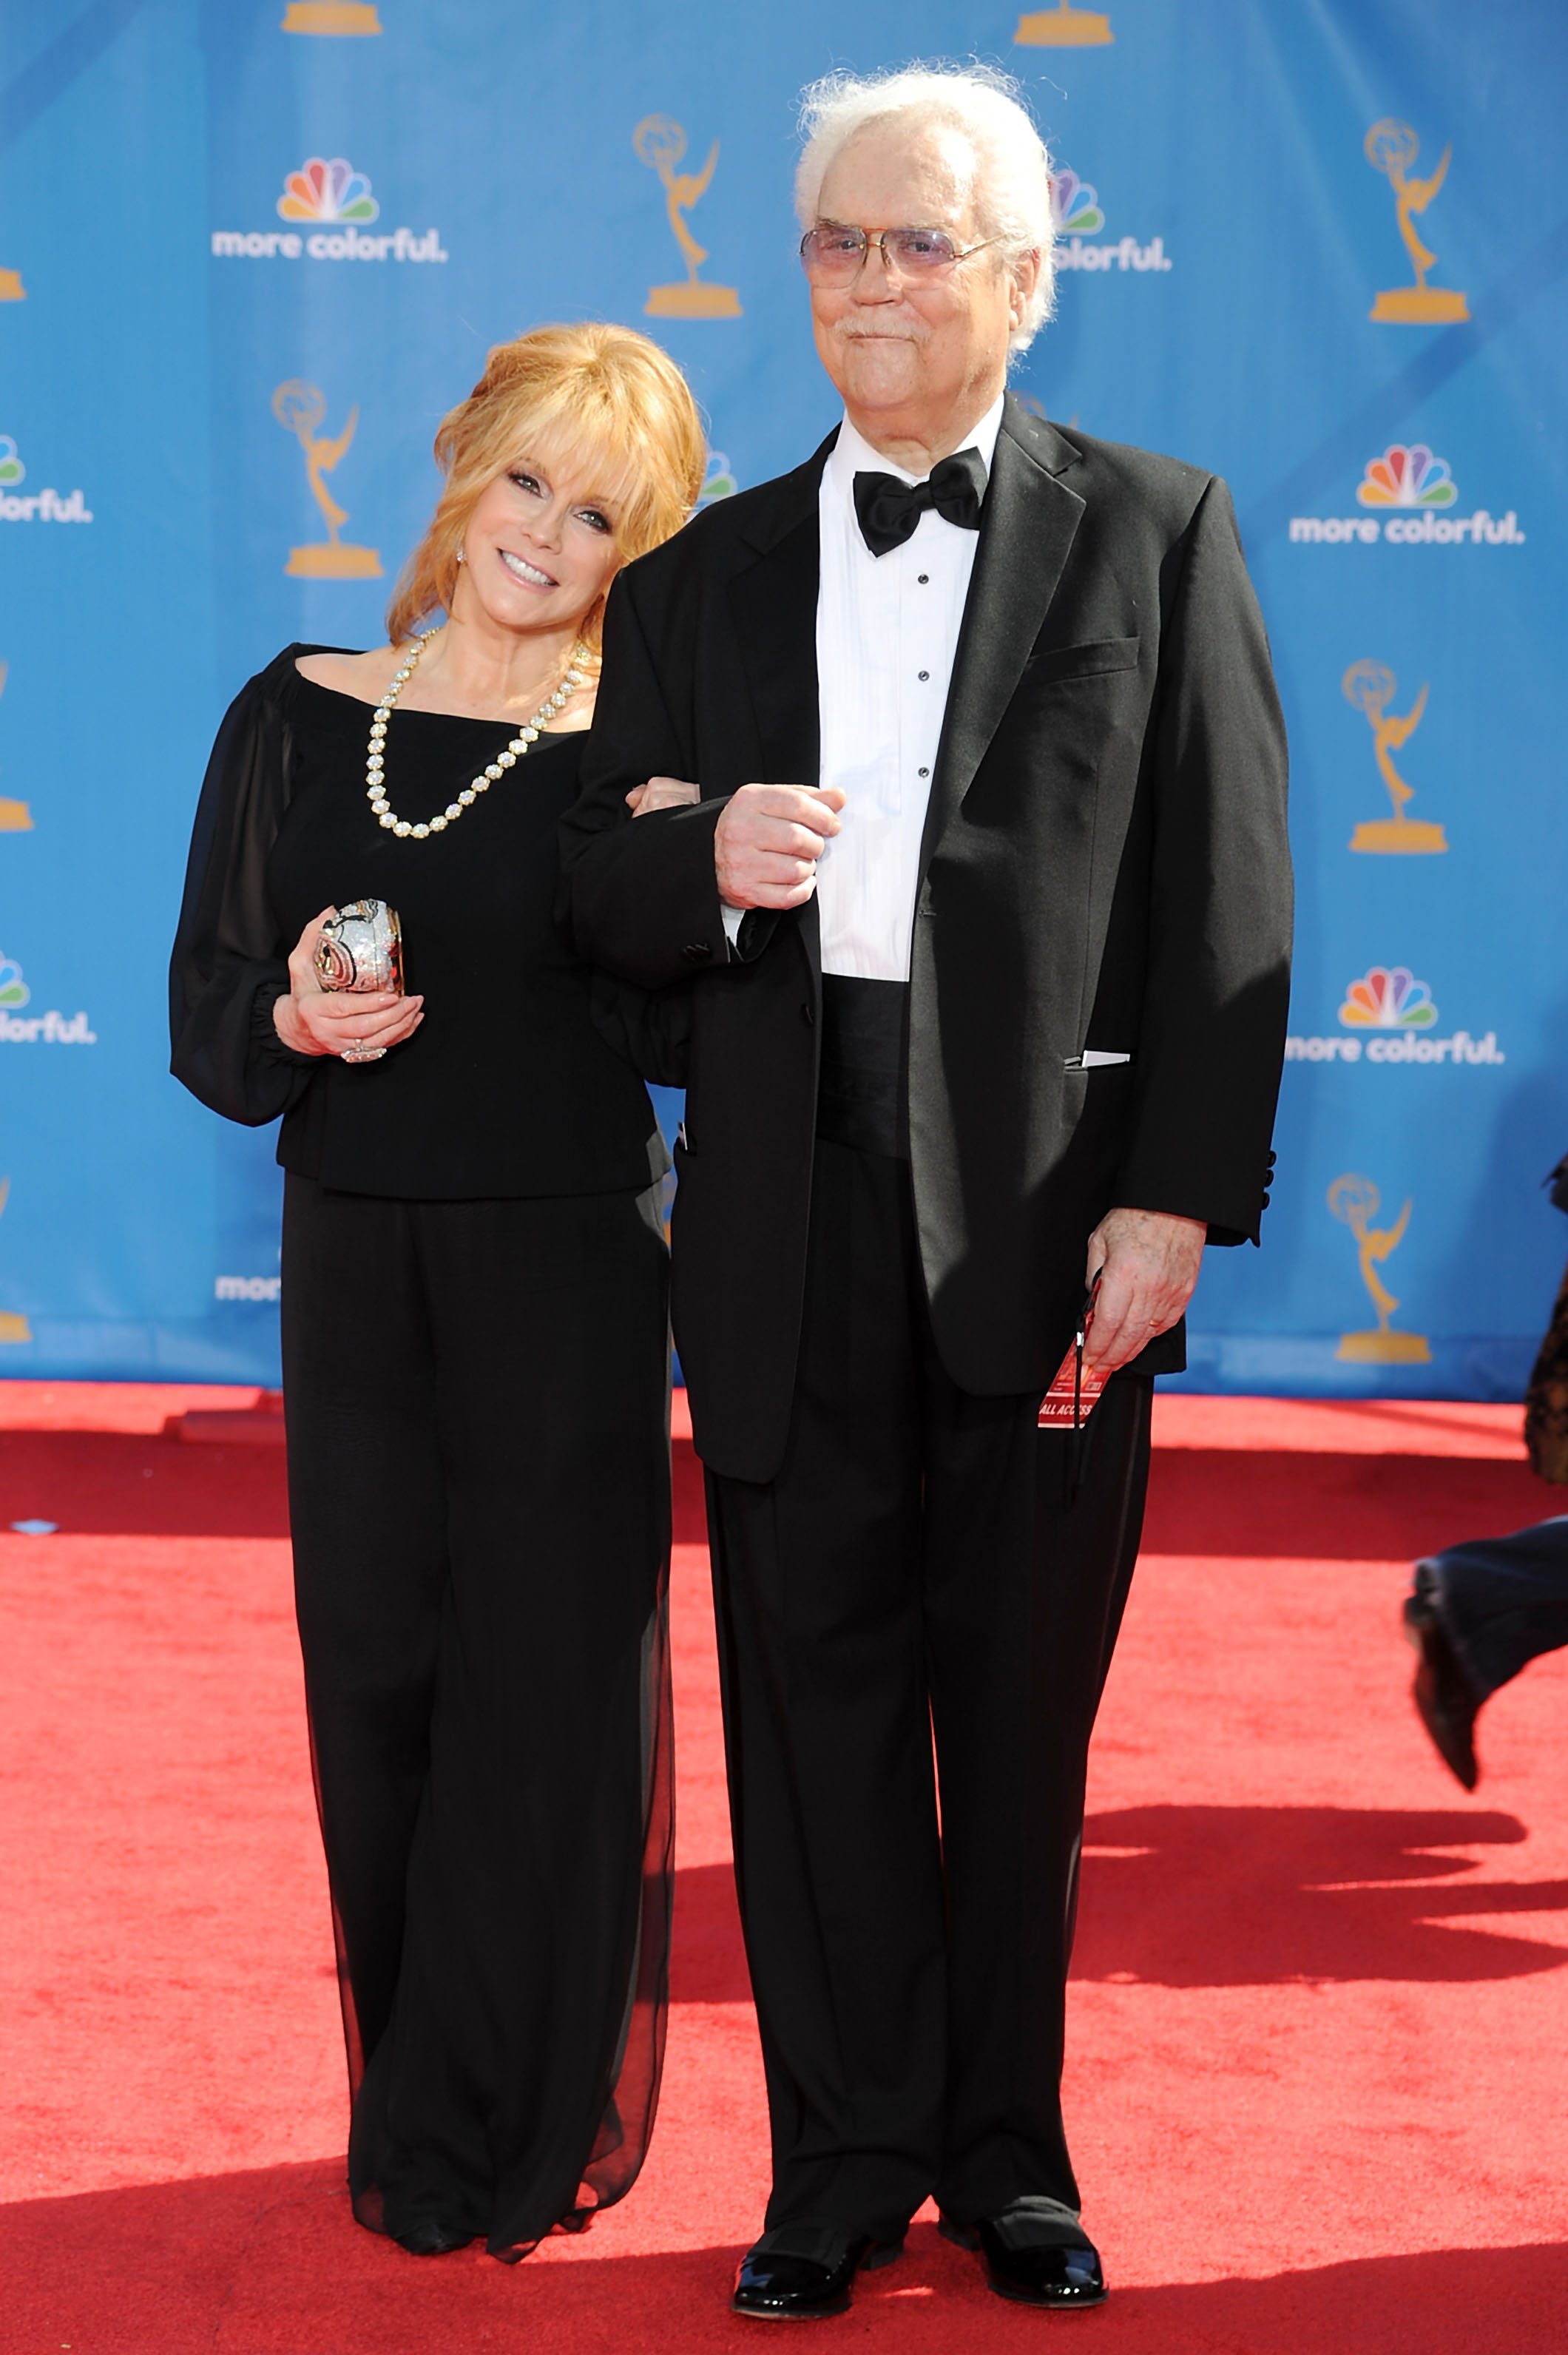 Actress Ann-Margret and actor Roger Smith arrive at the 62nd Annual Primetime Emmy Awards held at the Nokia Theatre L.A. Live on August 29, 2010 in Los Angeles, California | Source: Getty Images